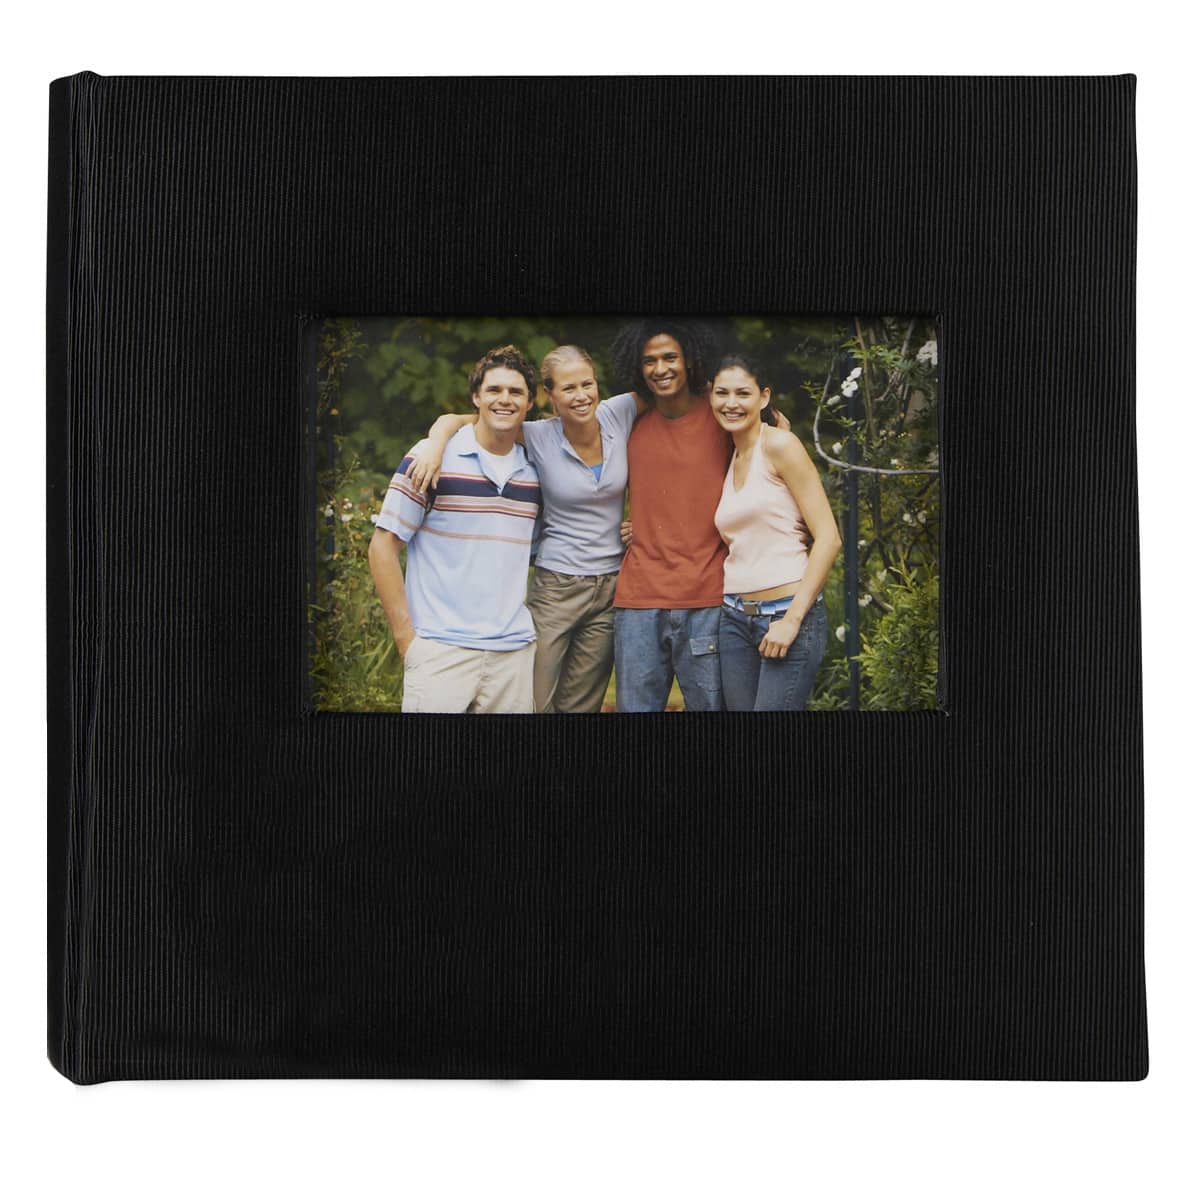 Butterfly Photo Album Any Occasion Design Holds 200 4 x 6" Photographs BTHW 